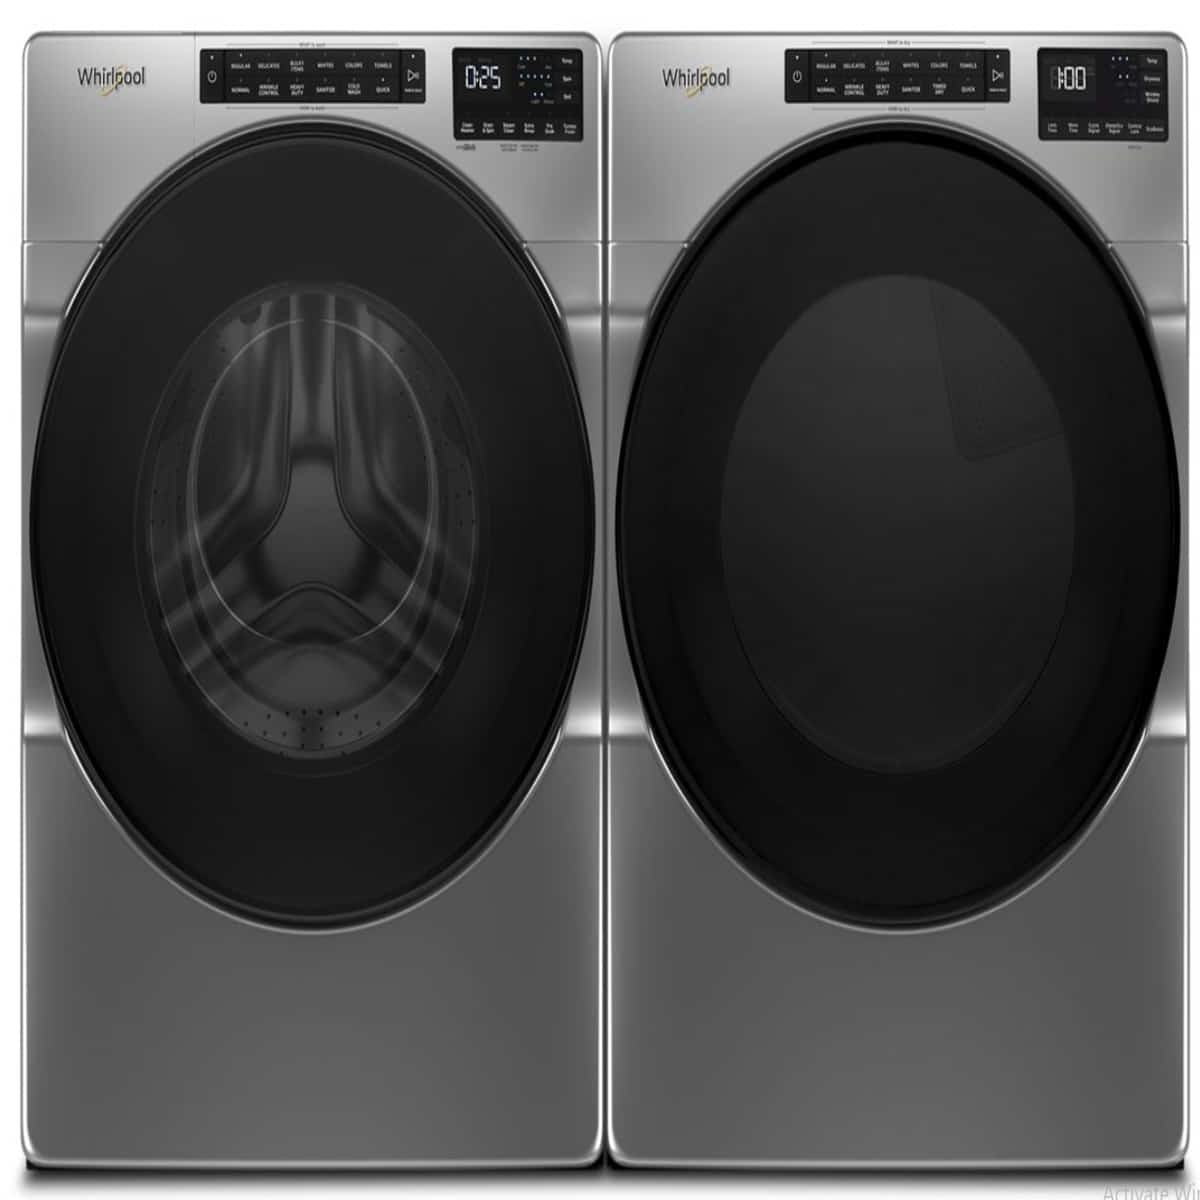 Whirlpool front load washer problems